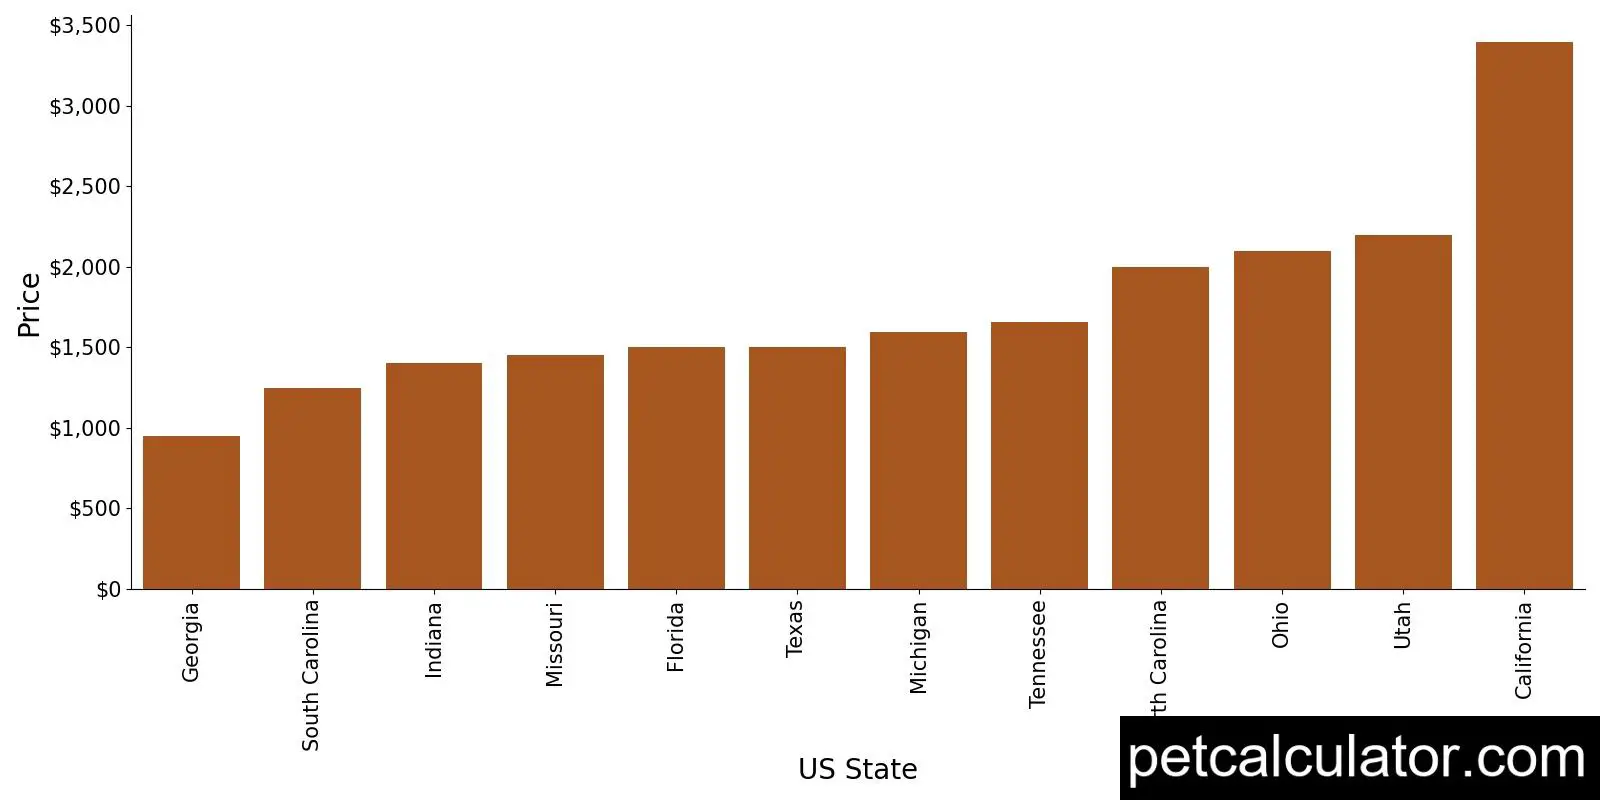 Price of Golden Cocker Retriever by US State 